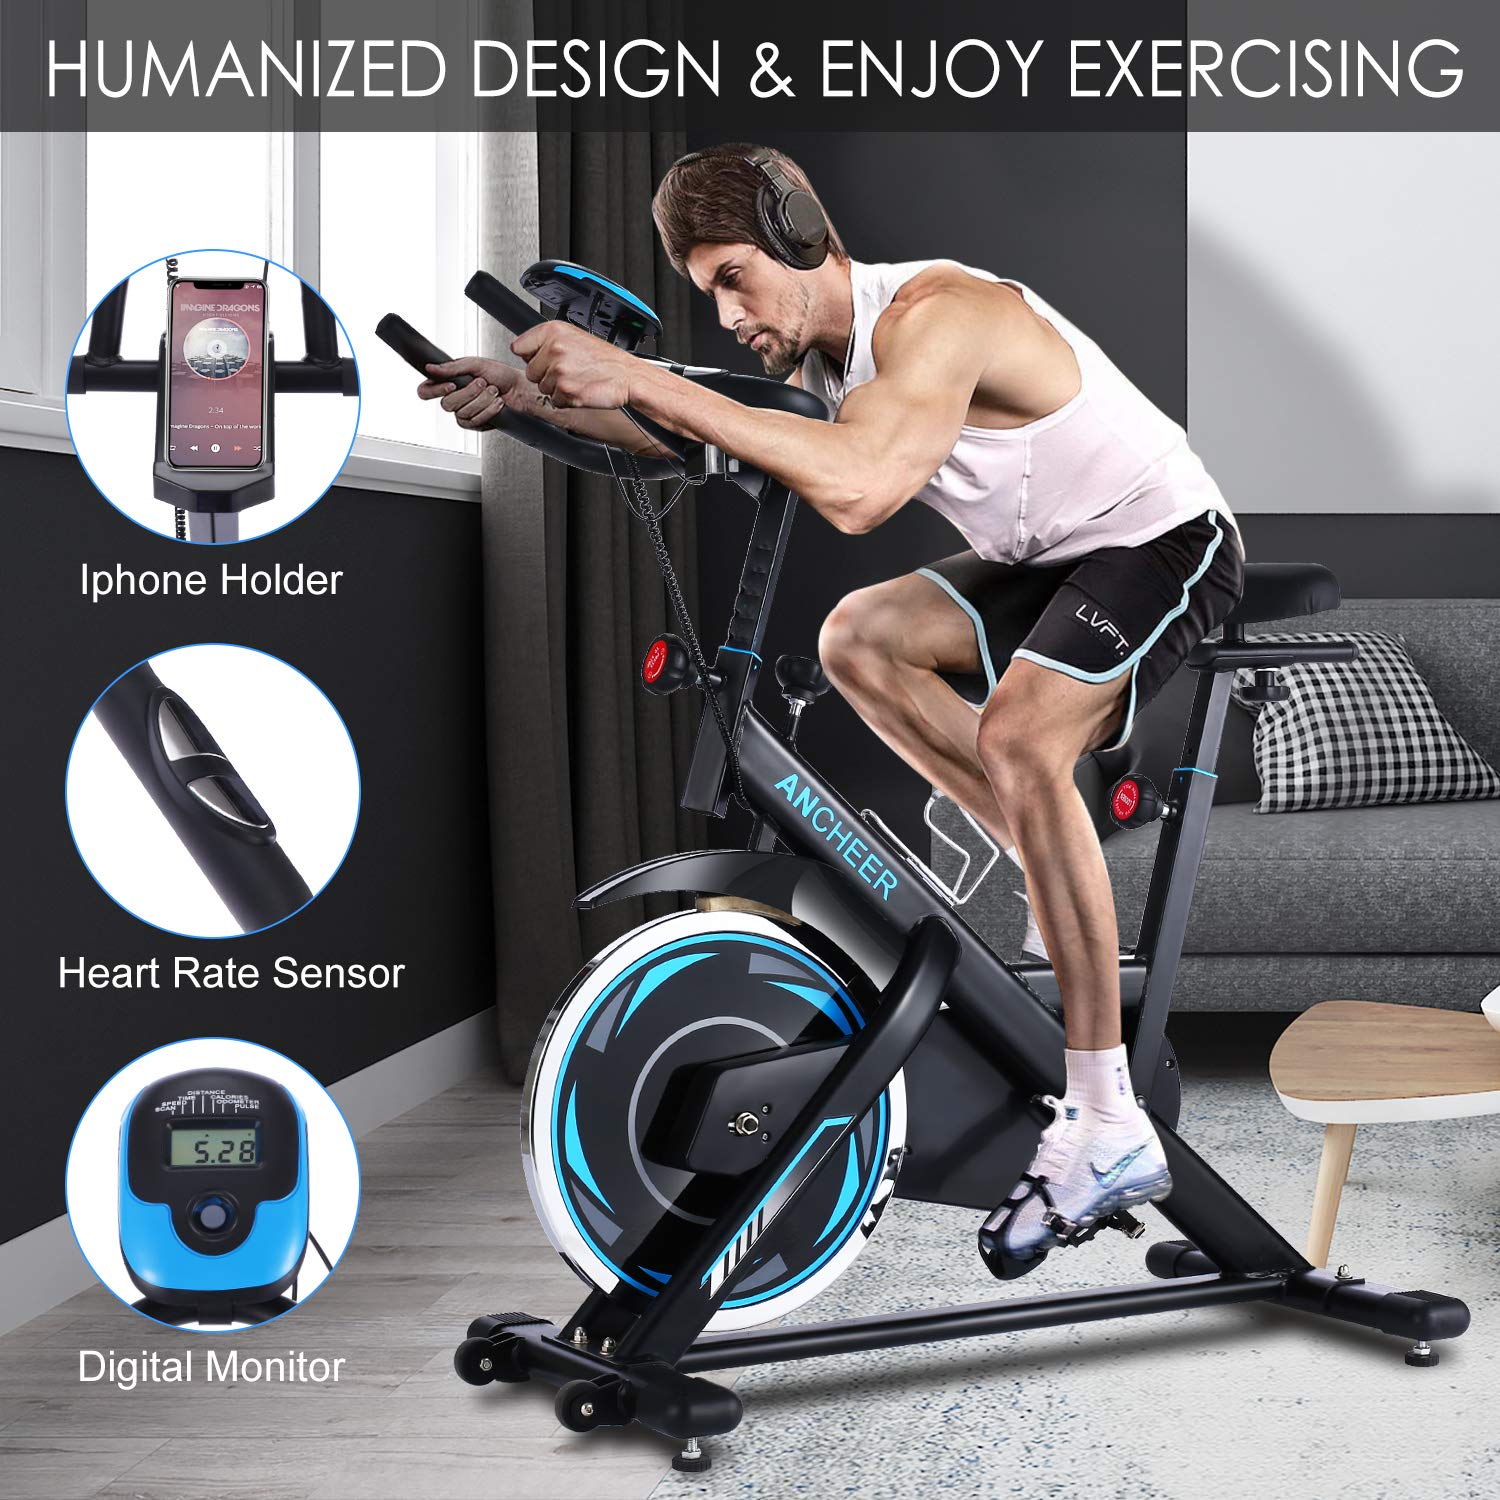 ANCHEER Exercise Bike, Indoor Cycling Bike with Seat Cushion, Holder and LCD Monitor for Home